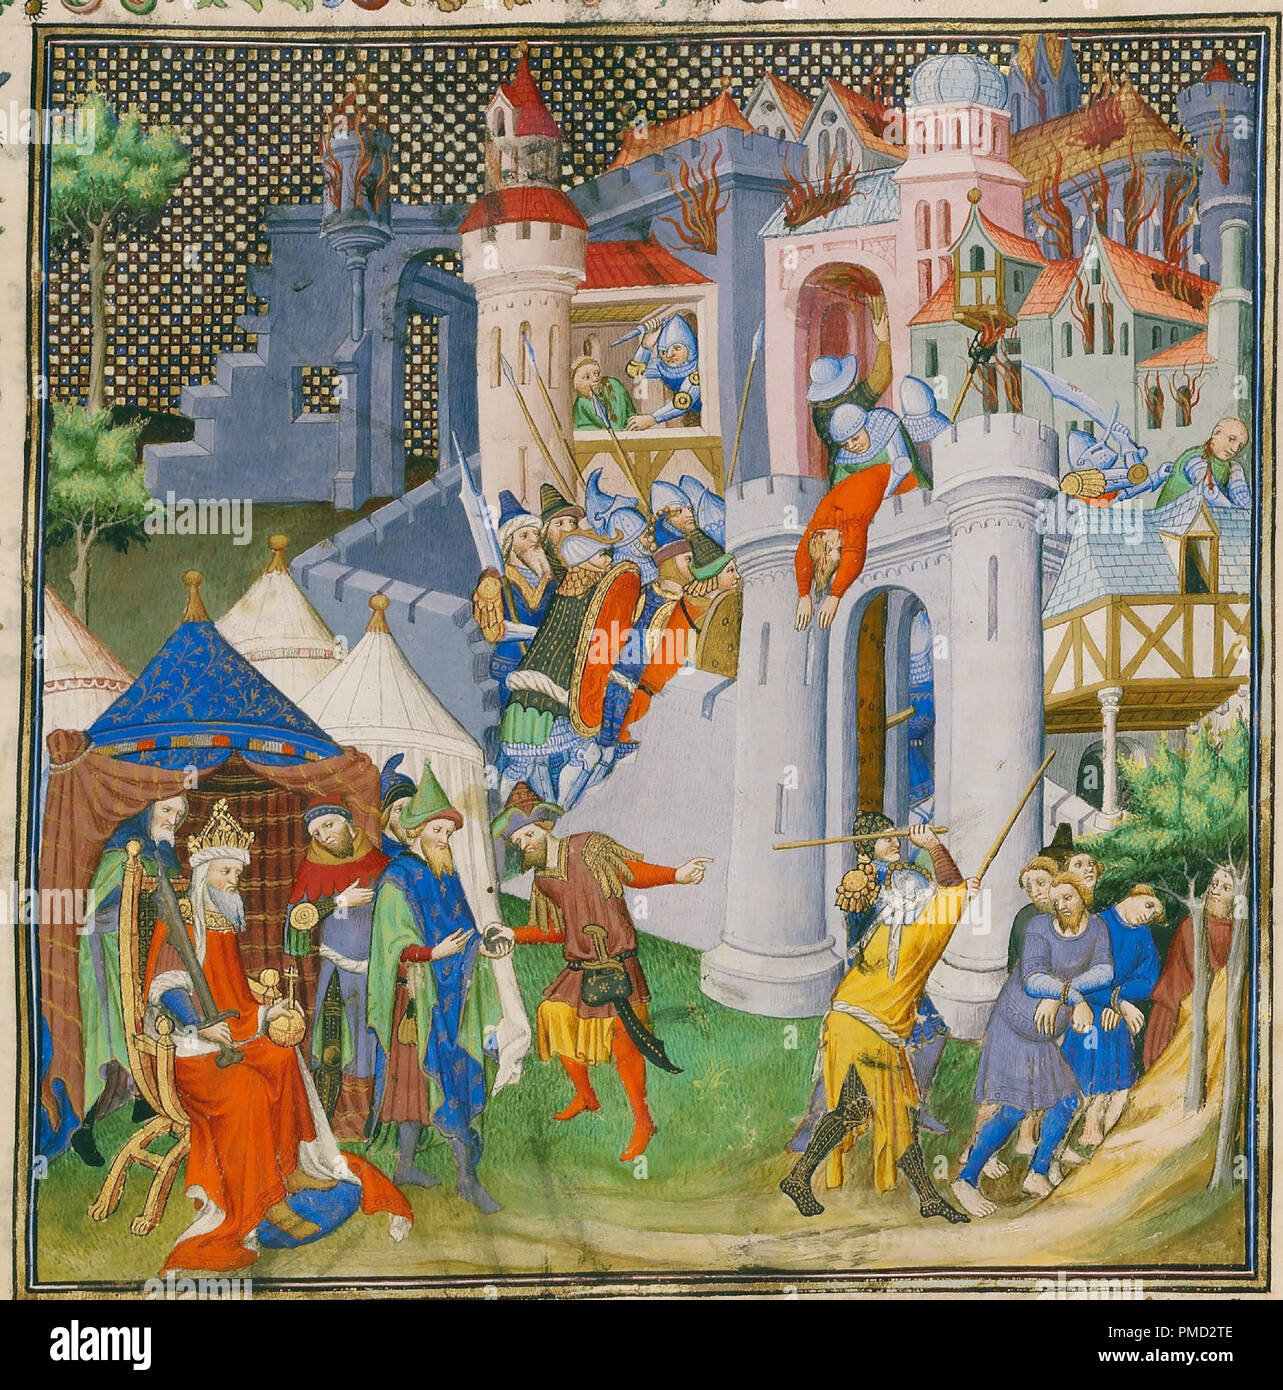 The Destruction of Jerusalem. Date/Period: Ca. 1413 - 1415. Folio. Tempera colors, gold leaf, gold paint, and ink on parchment. Height: 420 mm (16.53 in); Width: 296 mm (11.65 in). Author: UNKNOWN. Stock Photo